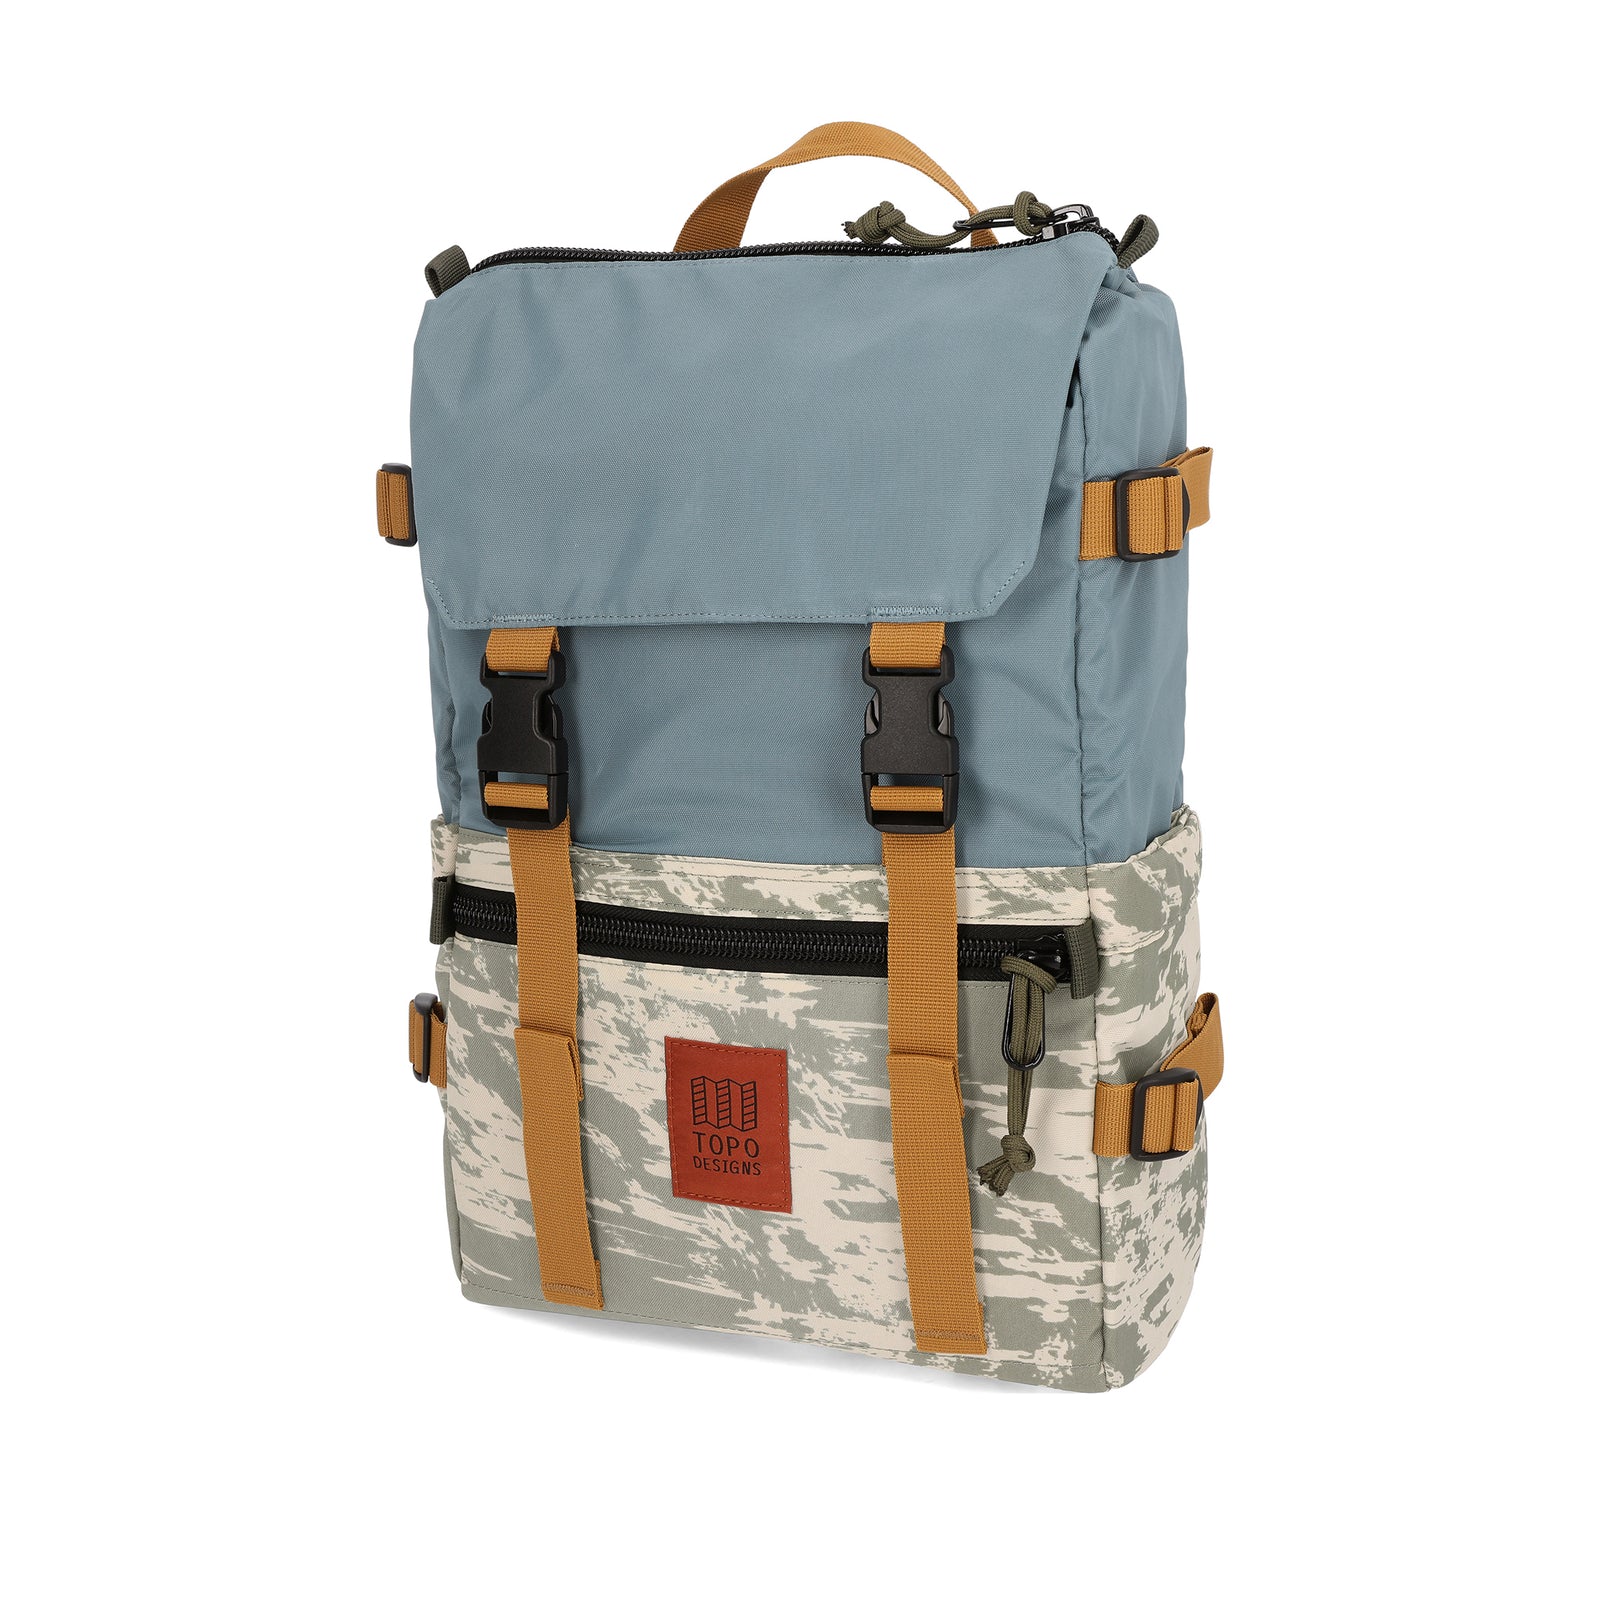 Topo Designs Rover Pack Classic laptop backpack in "Goblin Blue / Sand Multi".